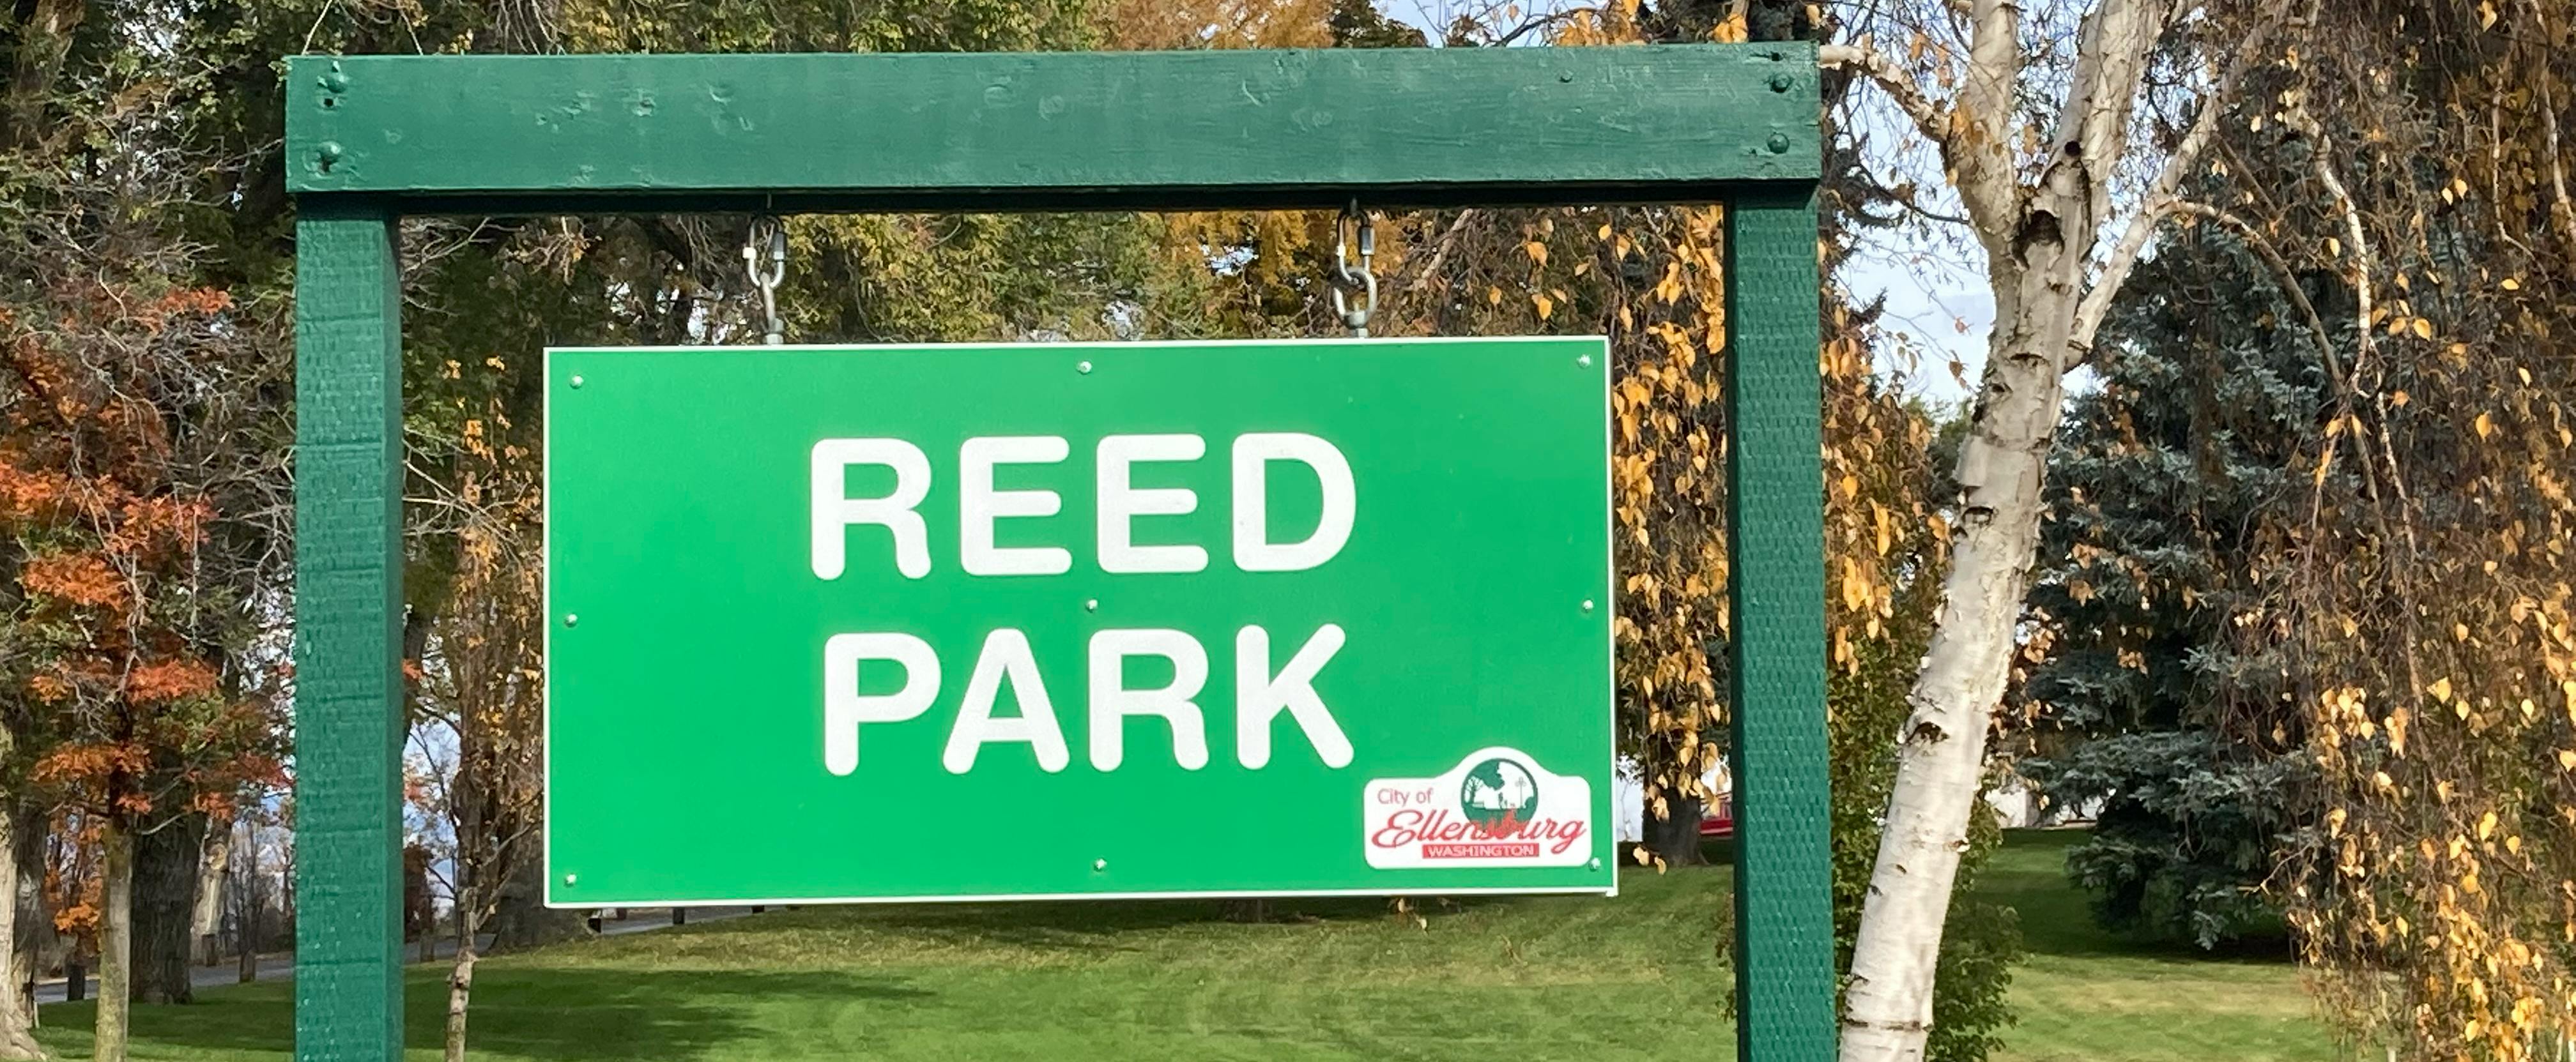 Reed Park sign